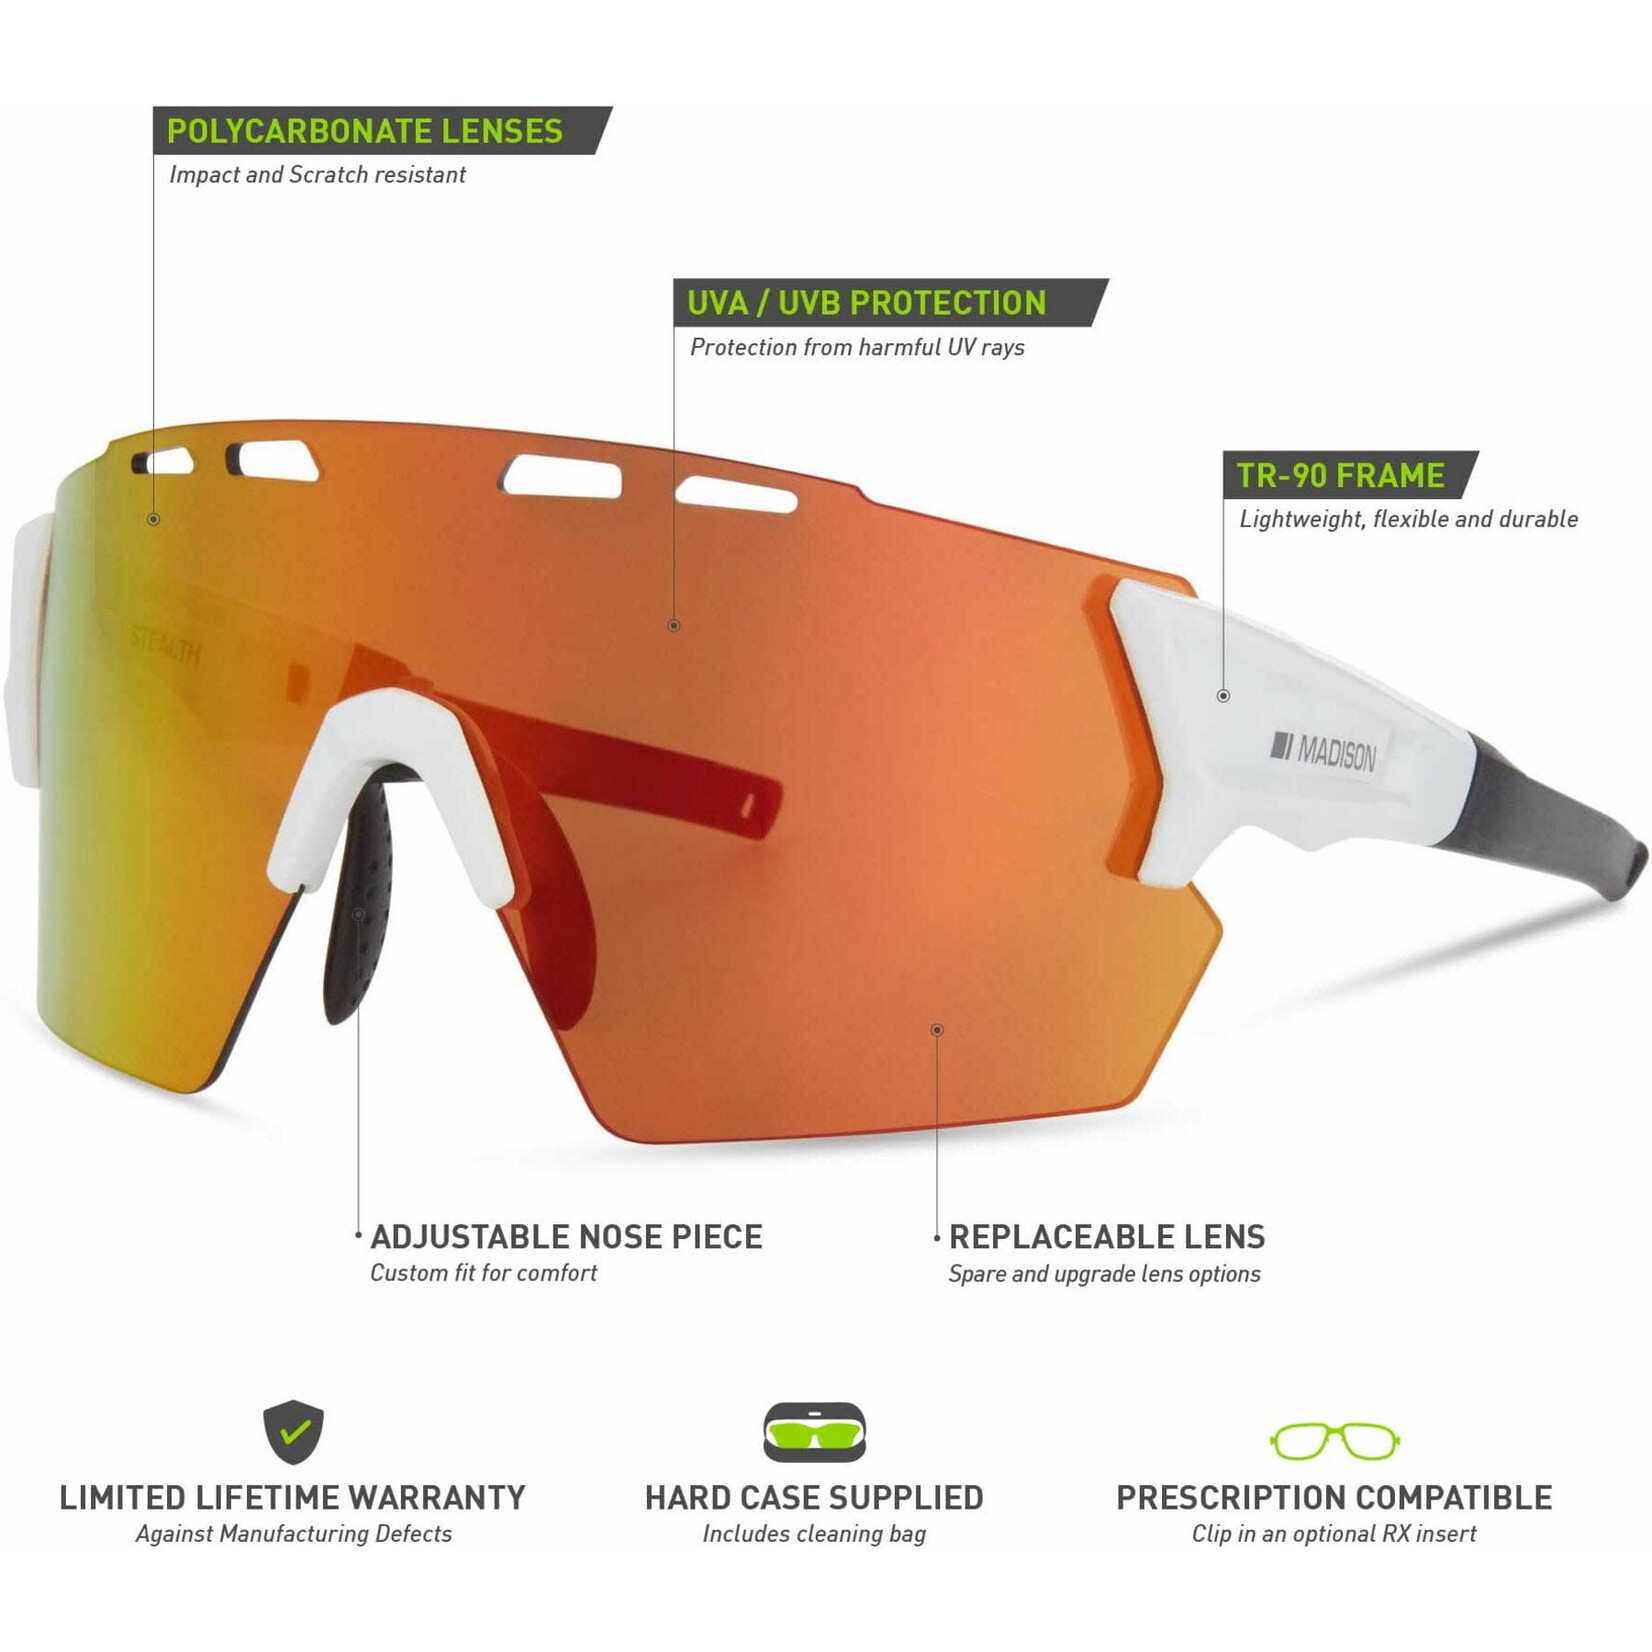 Madison Madison Stealth II Sunglasses - 3 pack - gloss white / blue mirror / amber and clear lens